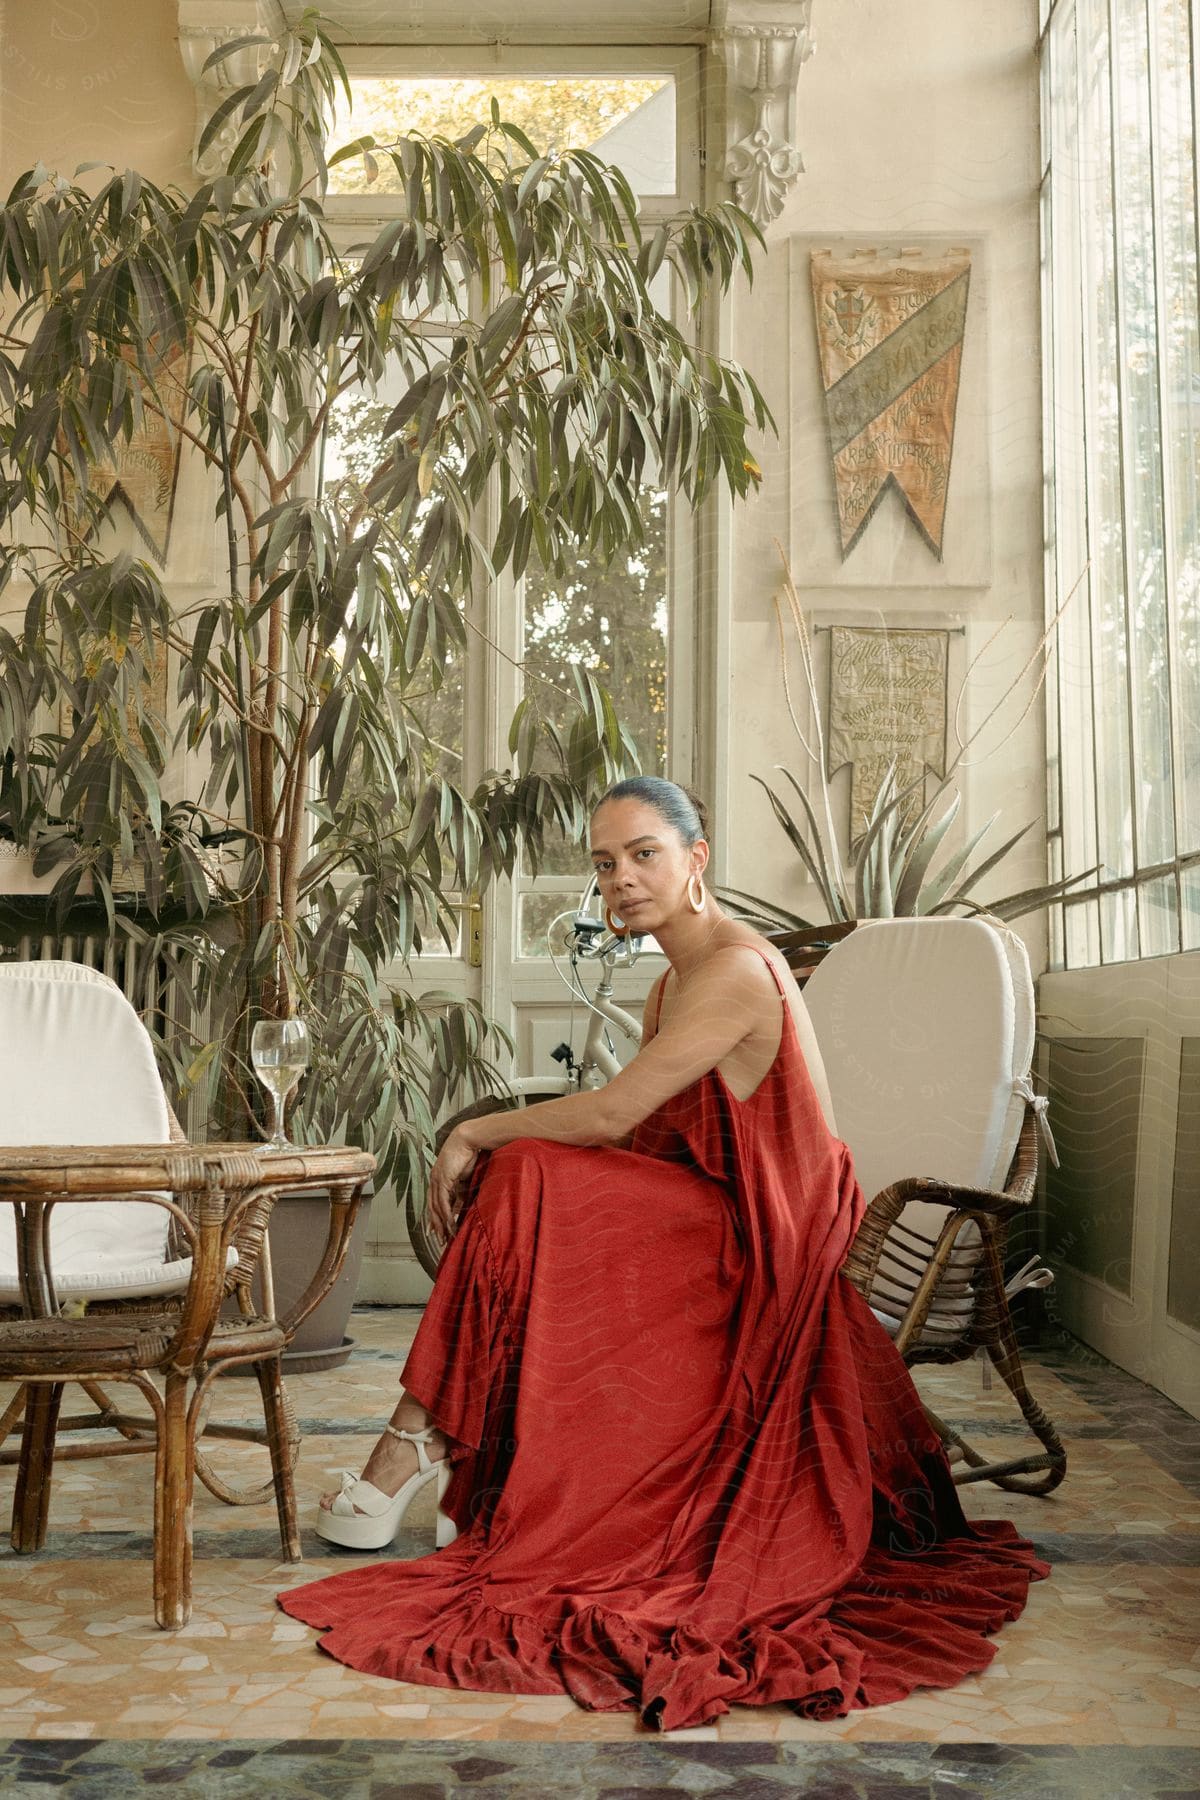 A woman seated in a stylish room wearing a long red gown